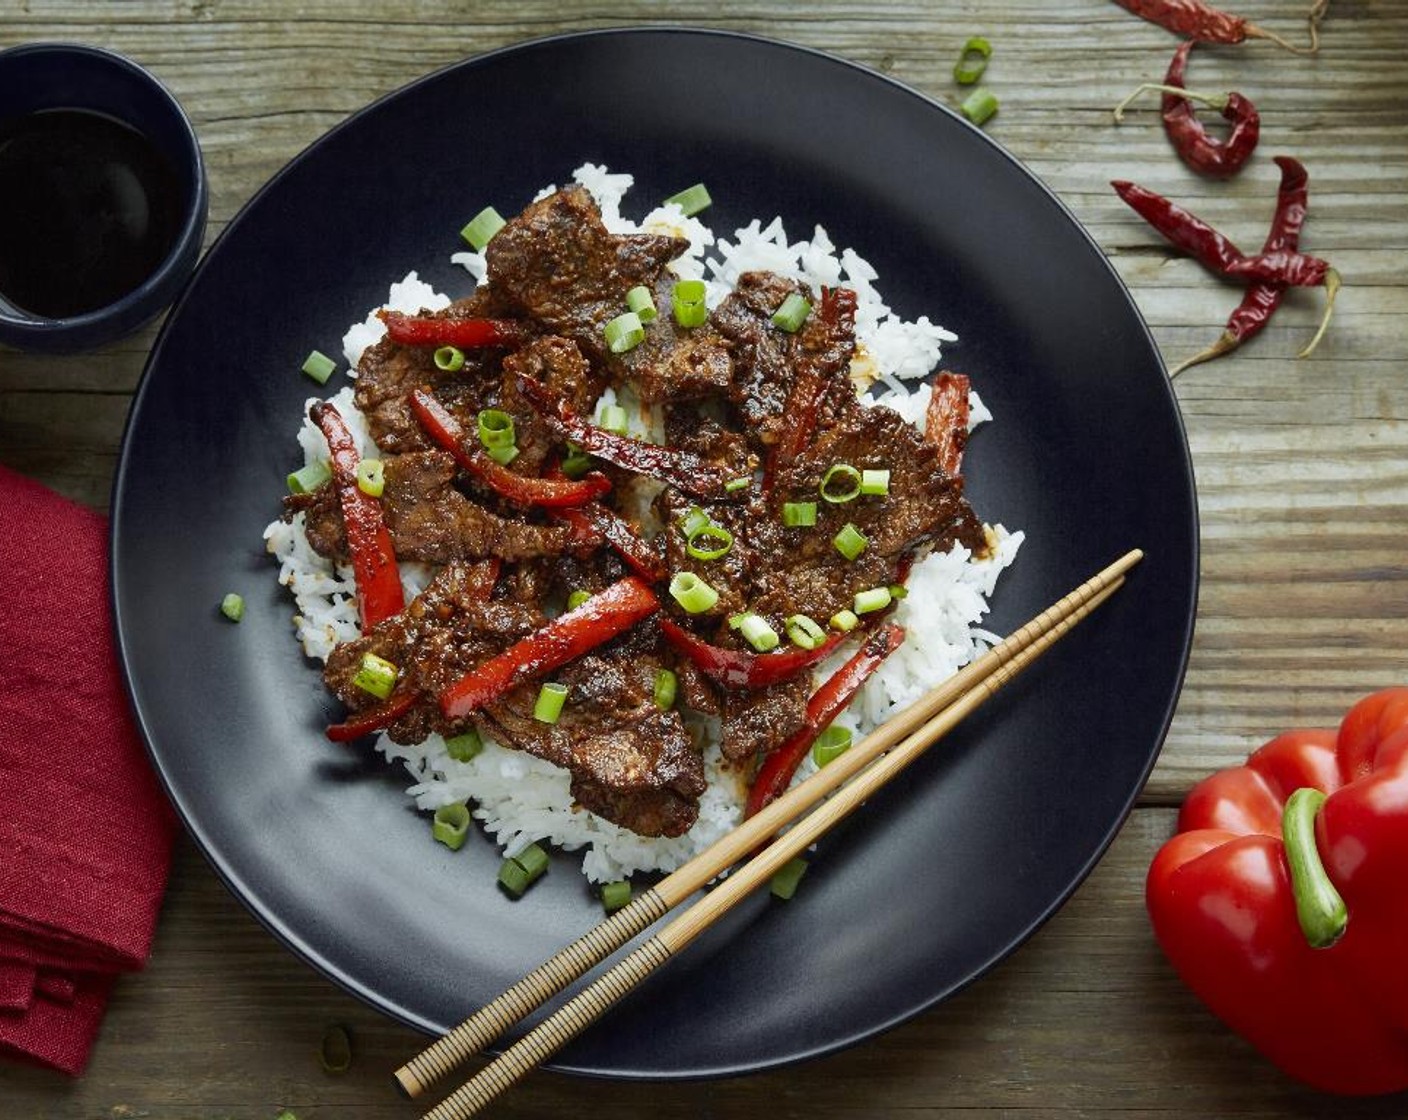 step 9 Divide the rice between two plates. Top with the Szechuan Steak and drizzle each serving with Sesame Oil (1 tsp). Garnish with the Scallion (1 bunch) and enjoy!